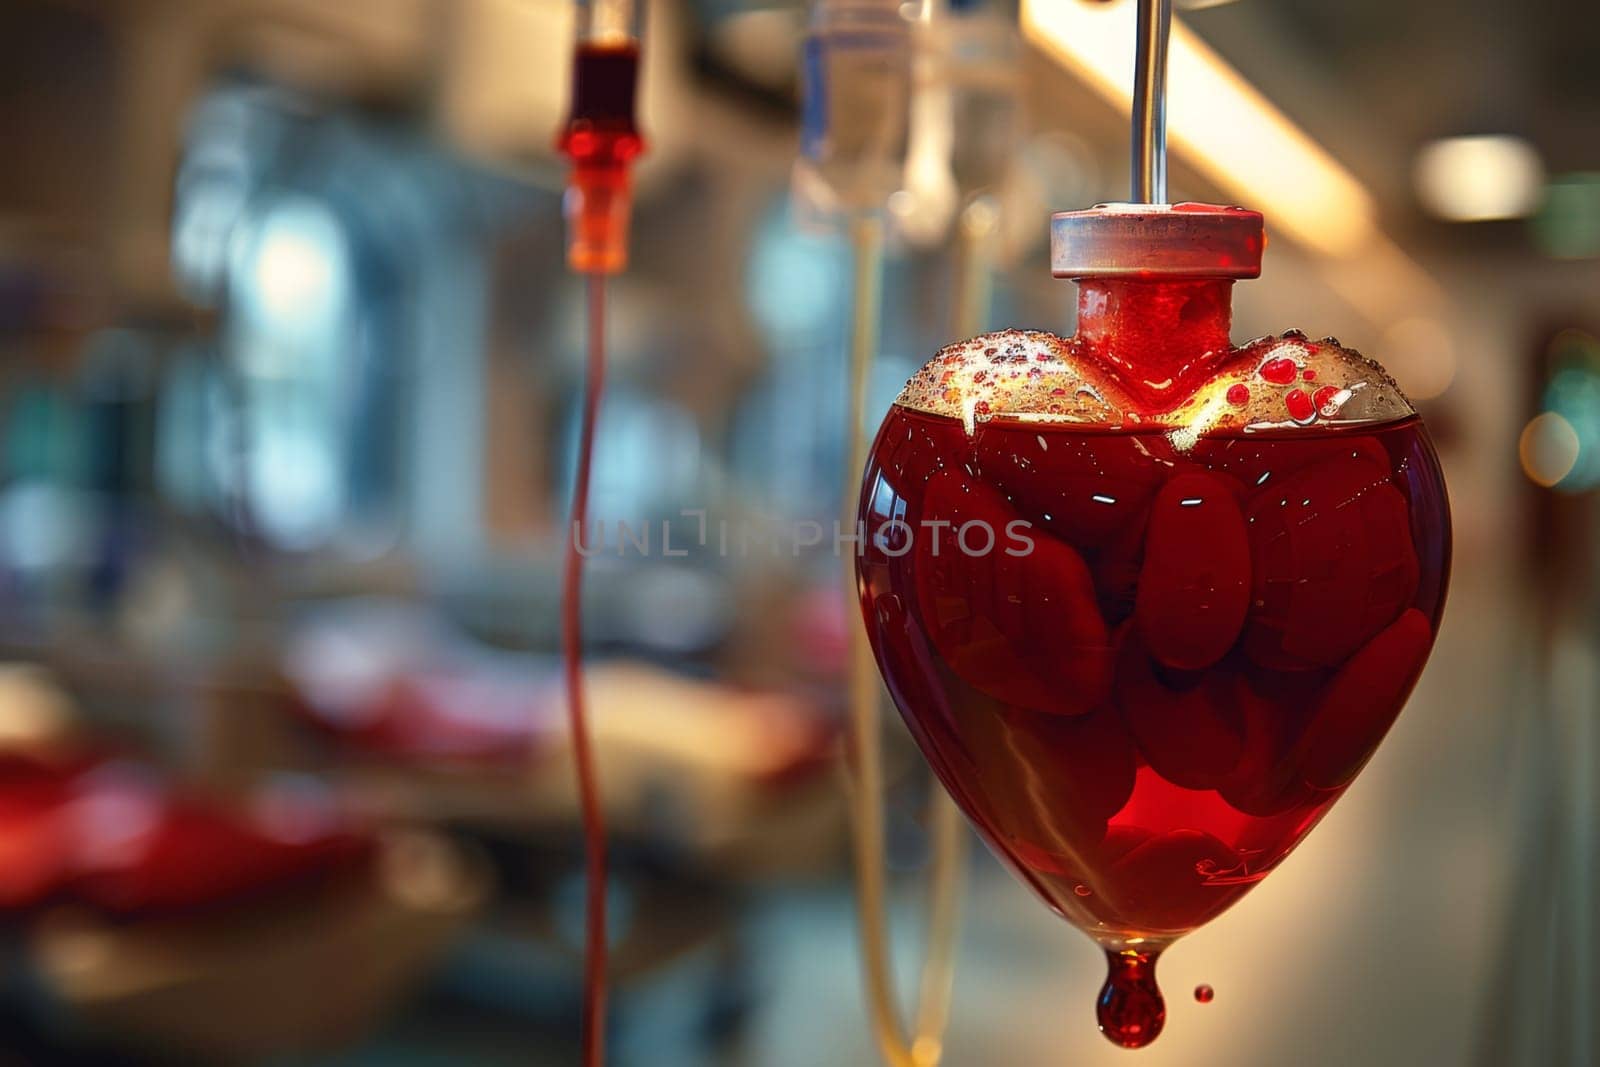 Every drop of blood counts. Drops of blood. The concept of World Blood Donor Day by Lobachad